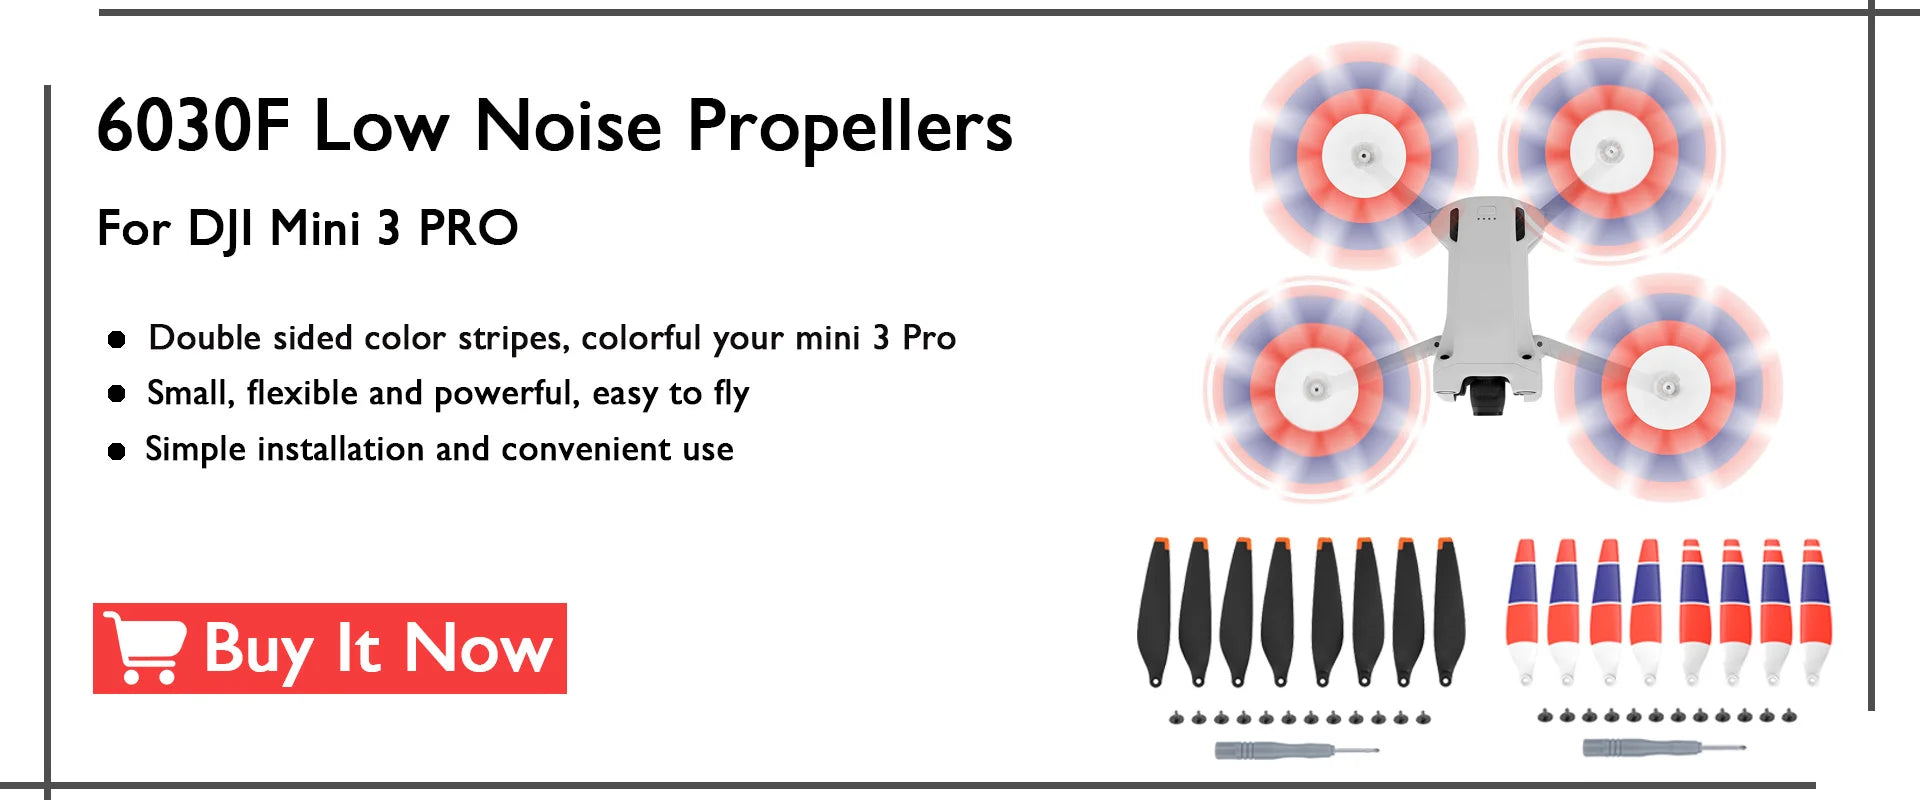 6030F Low Noise Propellers For DJI Mini 3 PRO Double sided color stripes